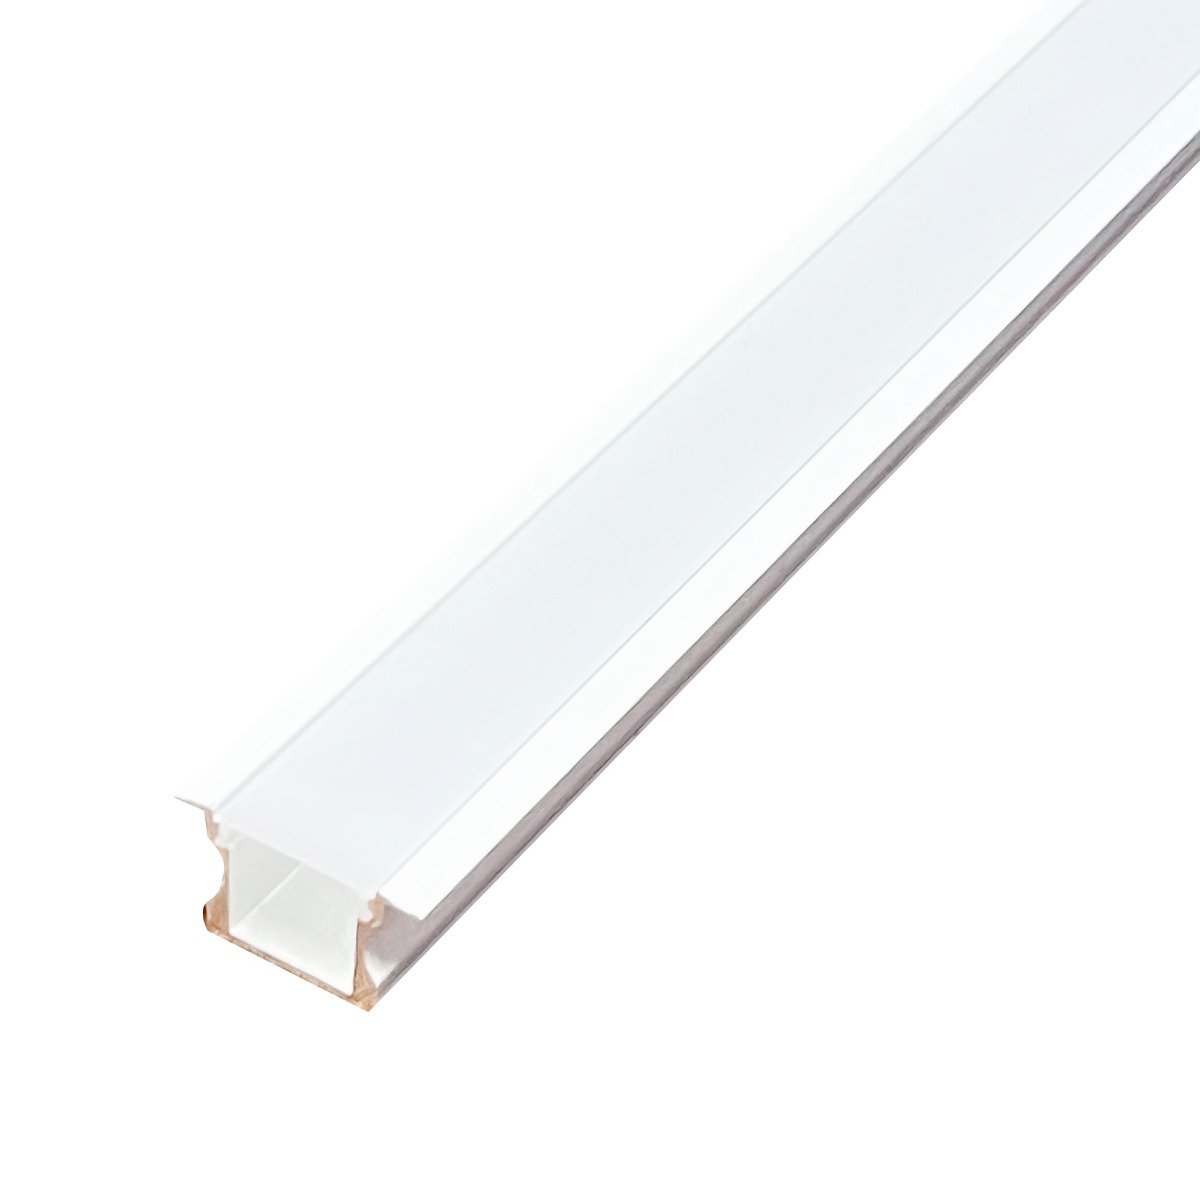 View 2m Long White Recessed 15mm LED Profile With Frosted Cover information